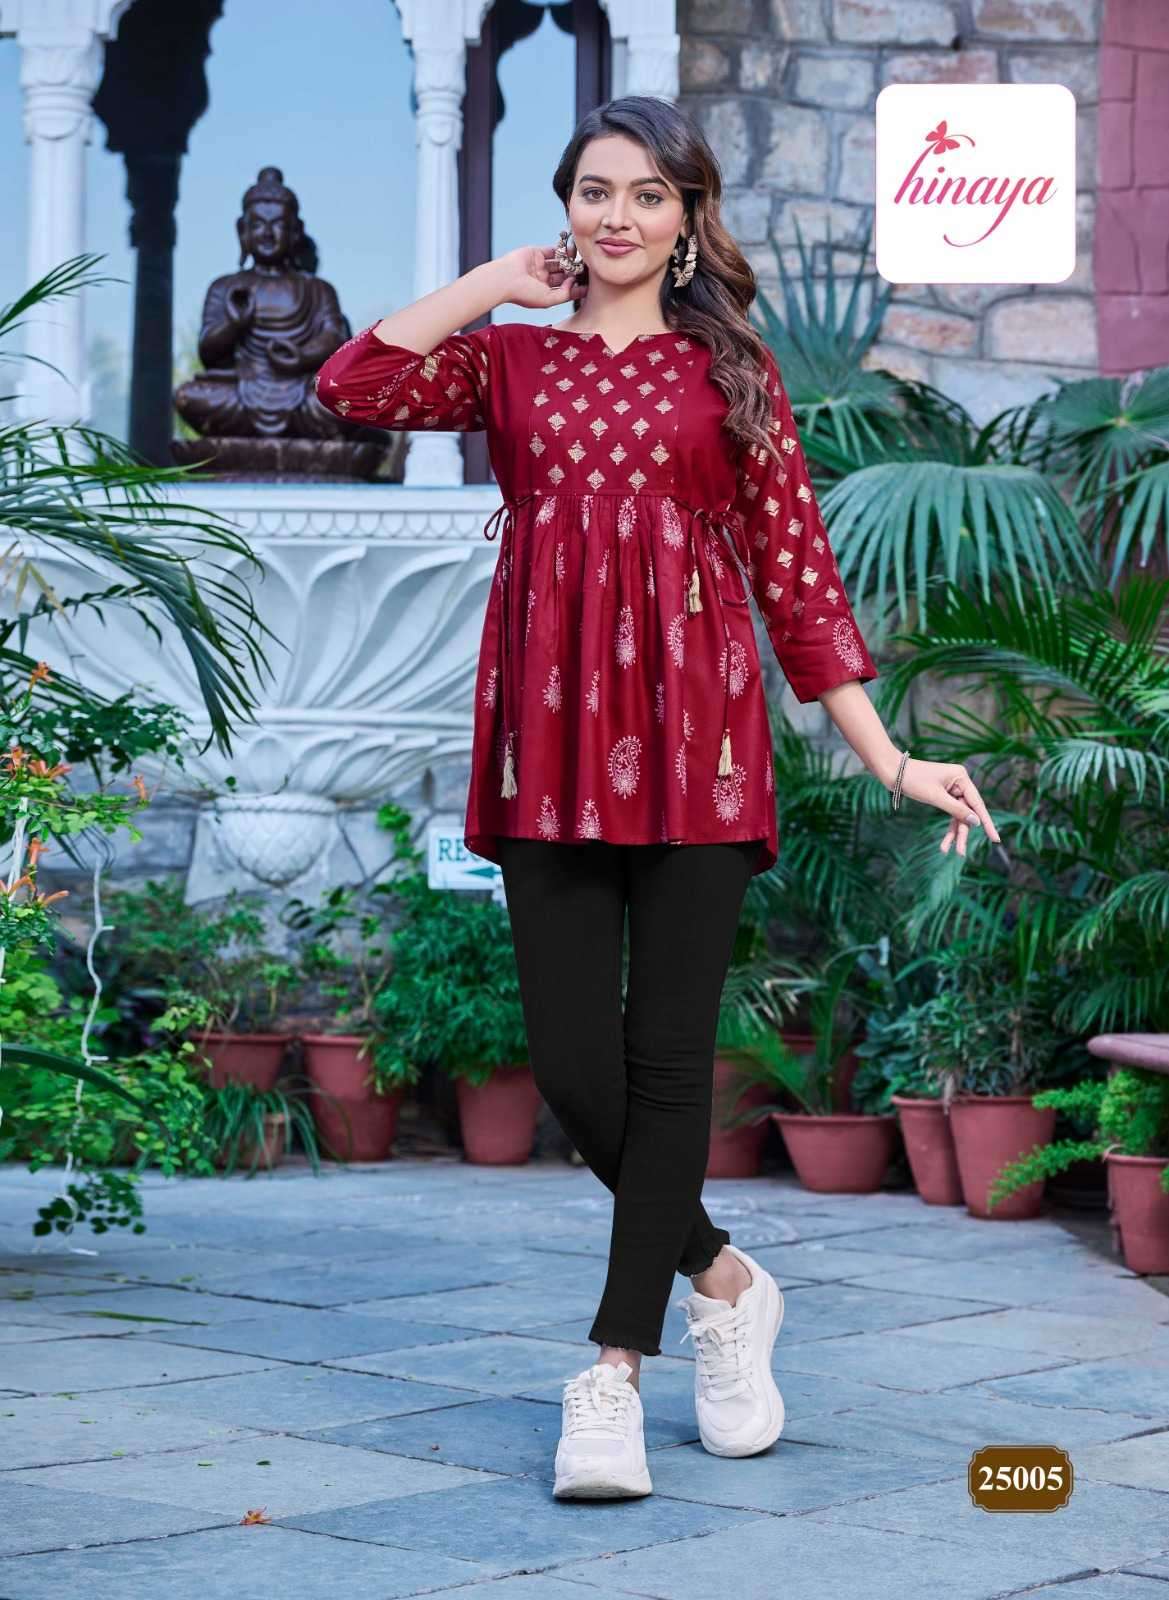 WESTERN 4 YOU SERIES 25001 TO 25008 BY HINAYA DESIGNER PRINTED RAYON TOPS ARE AVAILABLE AT WHOLESALE PRICE